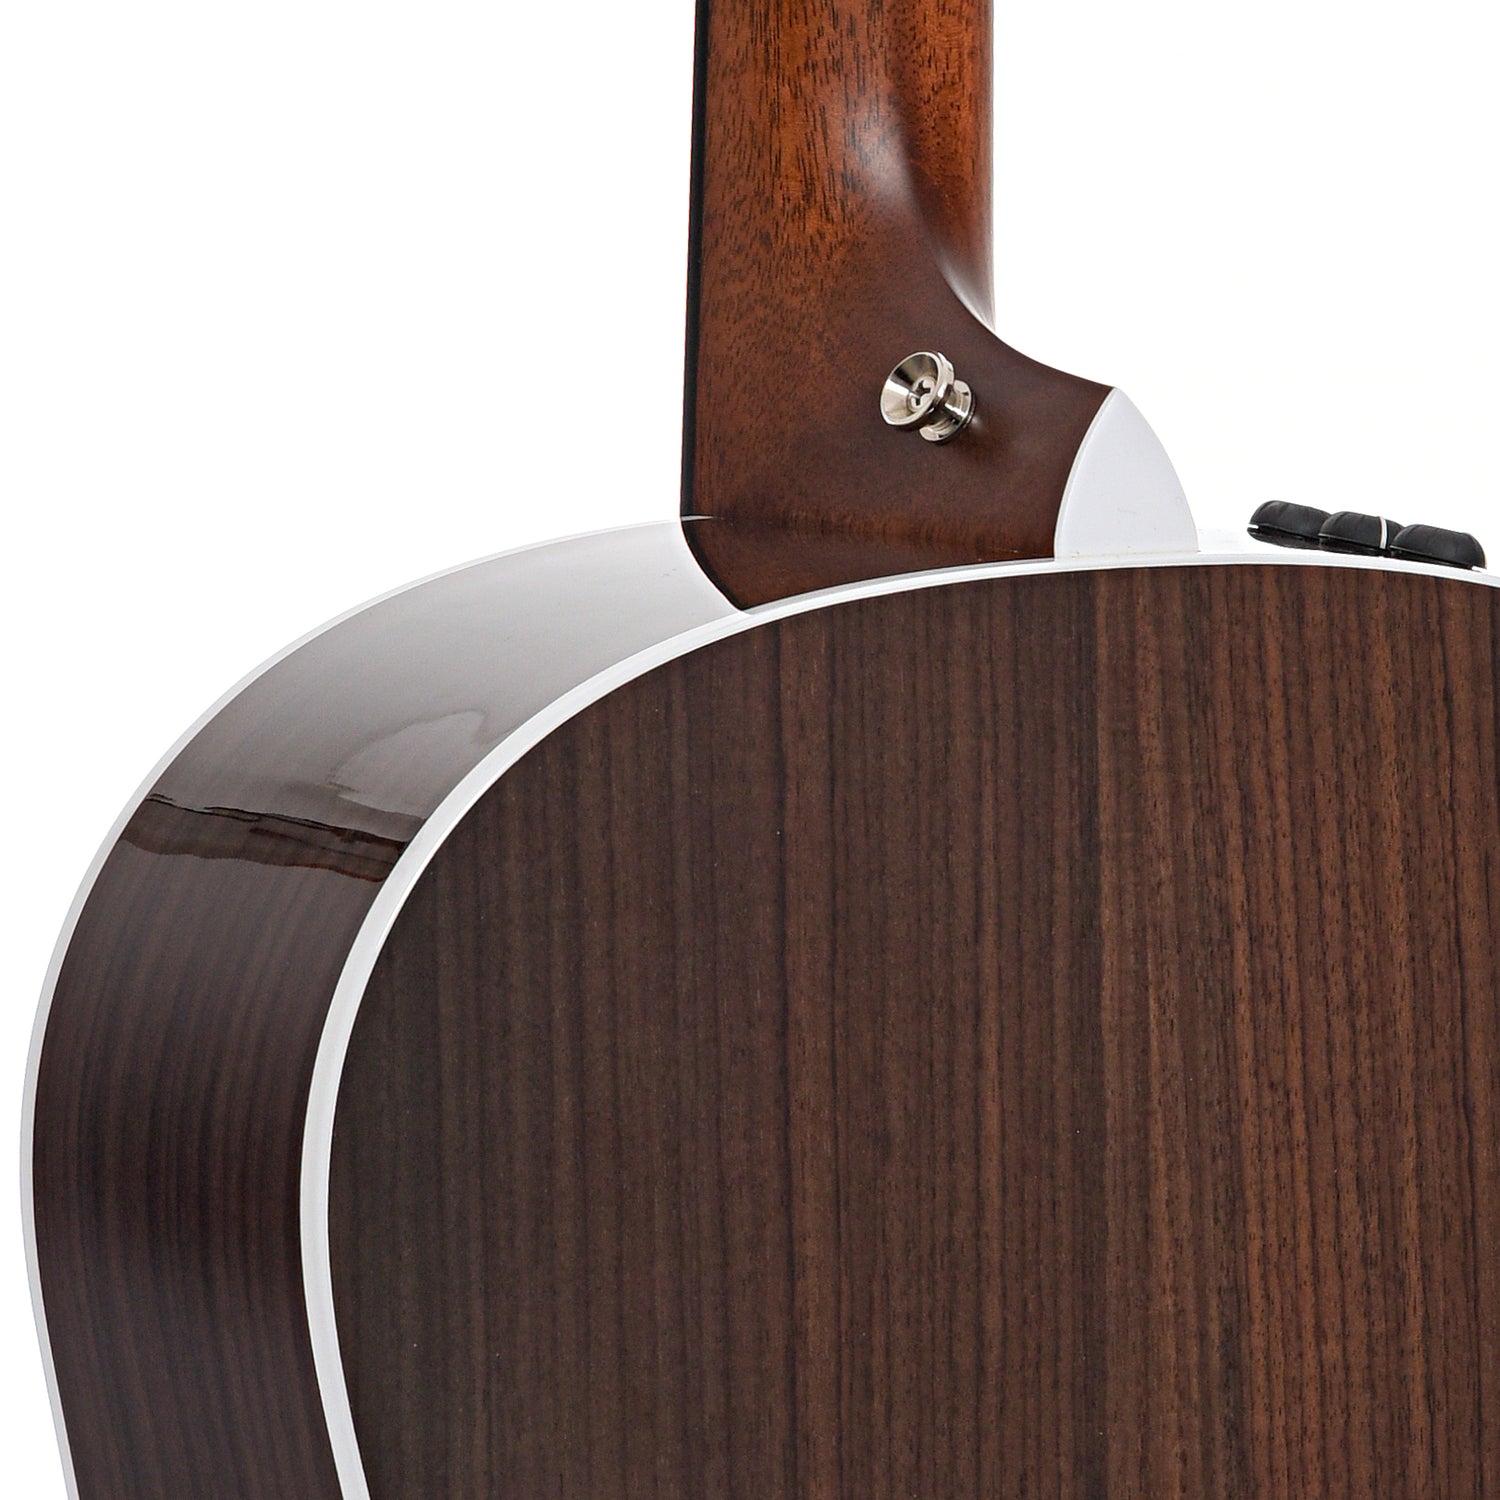 Heel of Taylor 417e Acoustic